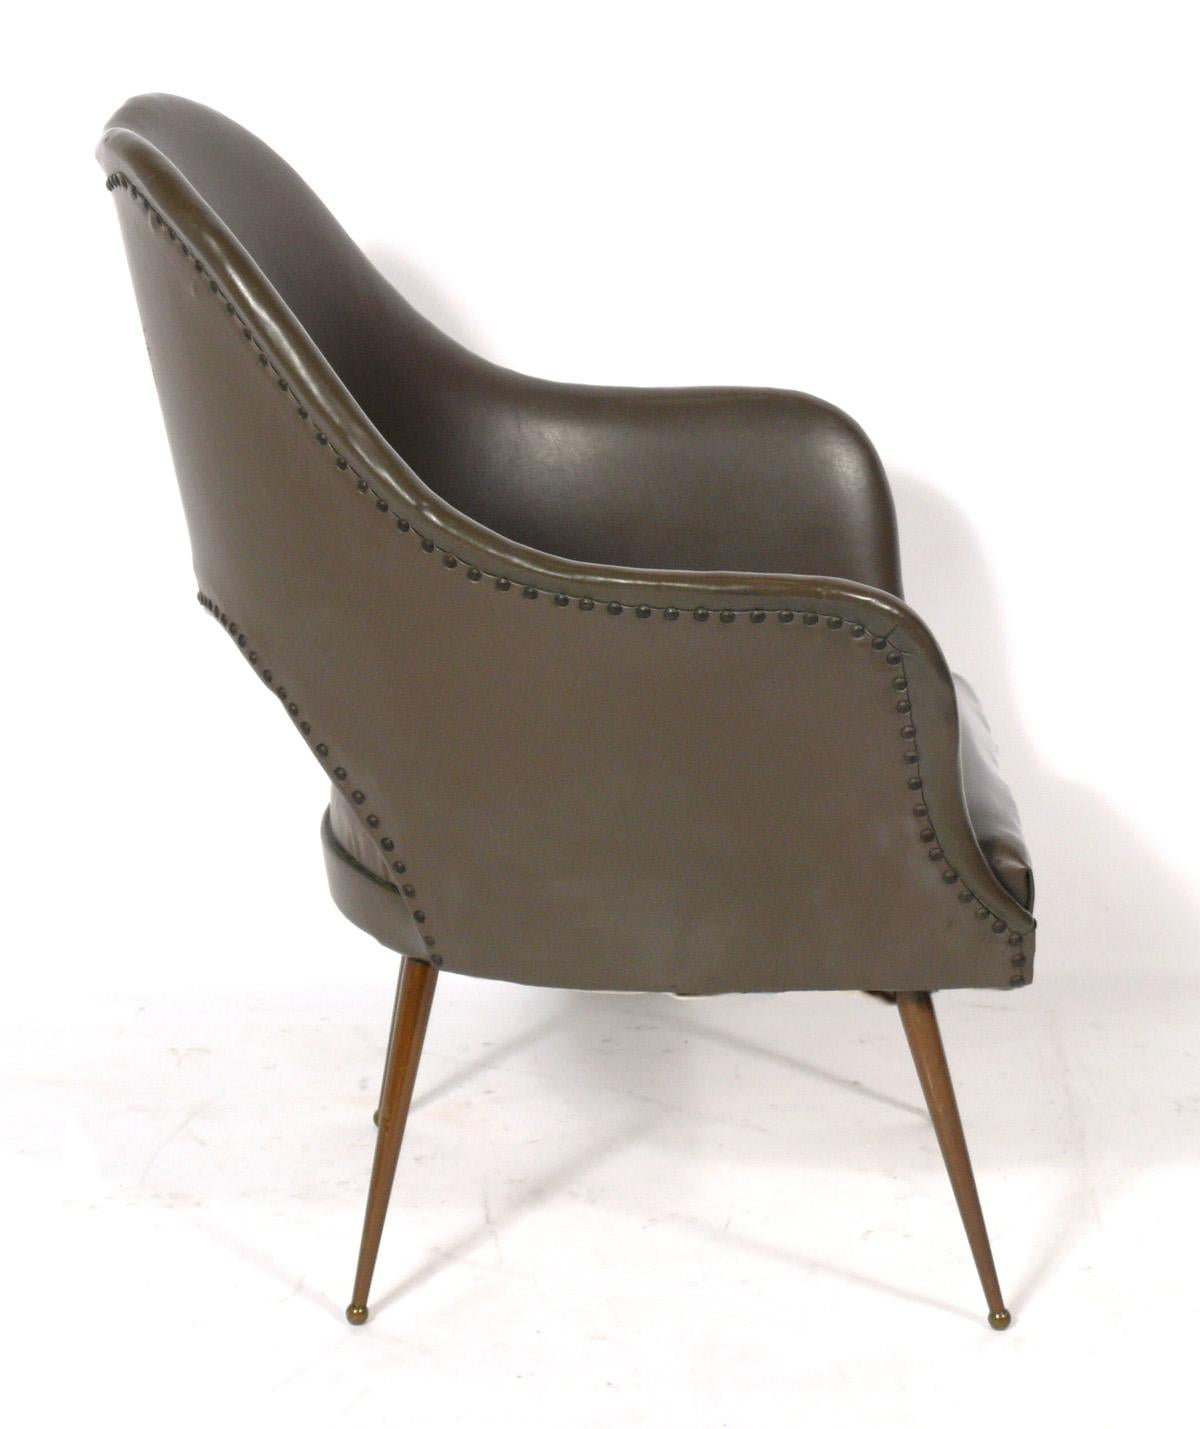 Plated Curvaceous Italian Mid Century Lounge Chair For Sale